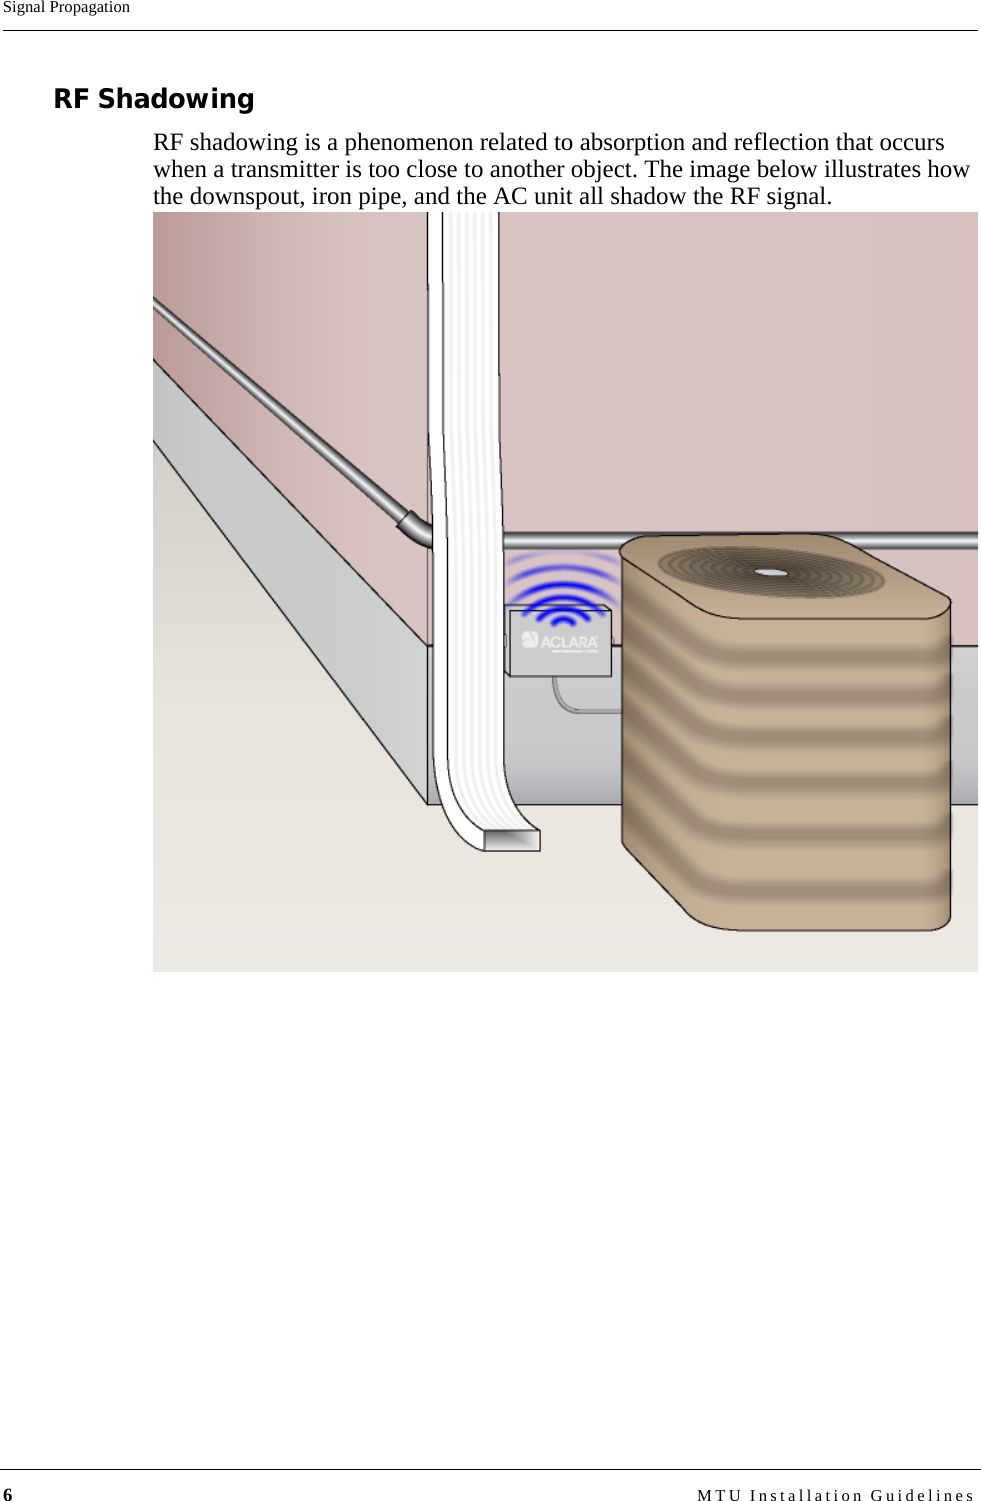 6MTU Installation GuidelinesSignal PropagationRF ShadowingRF shadowing is a phenomenon related to absorption and reflection that occurs when a transmitter is too close to another object. The image below illustrates how the downspout, iron pipe, and the AC unit all shadow the RF signal.